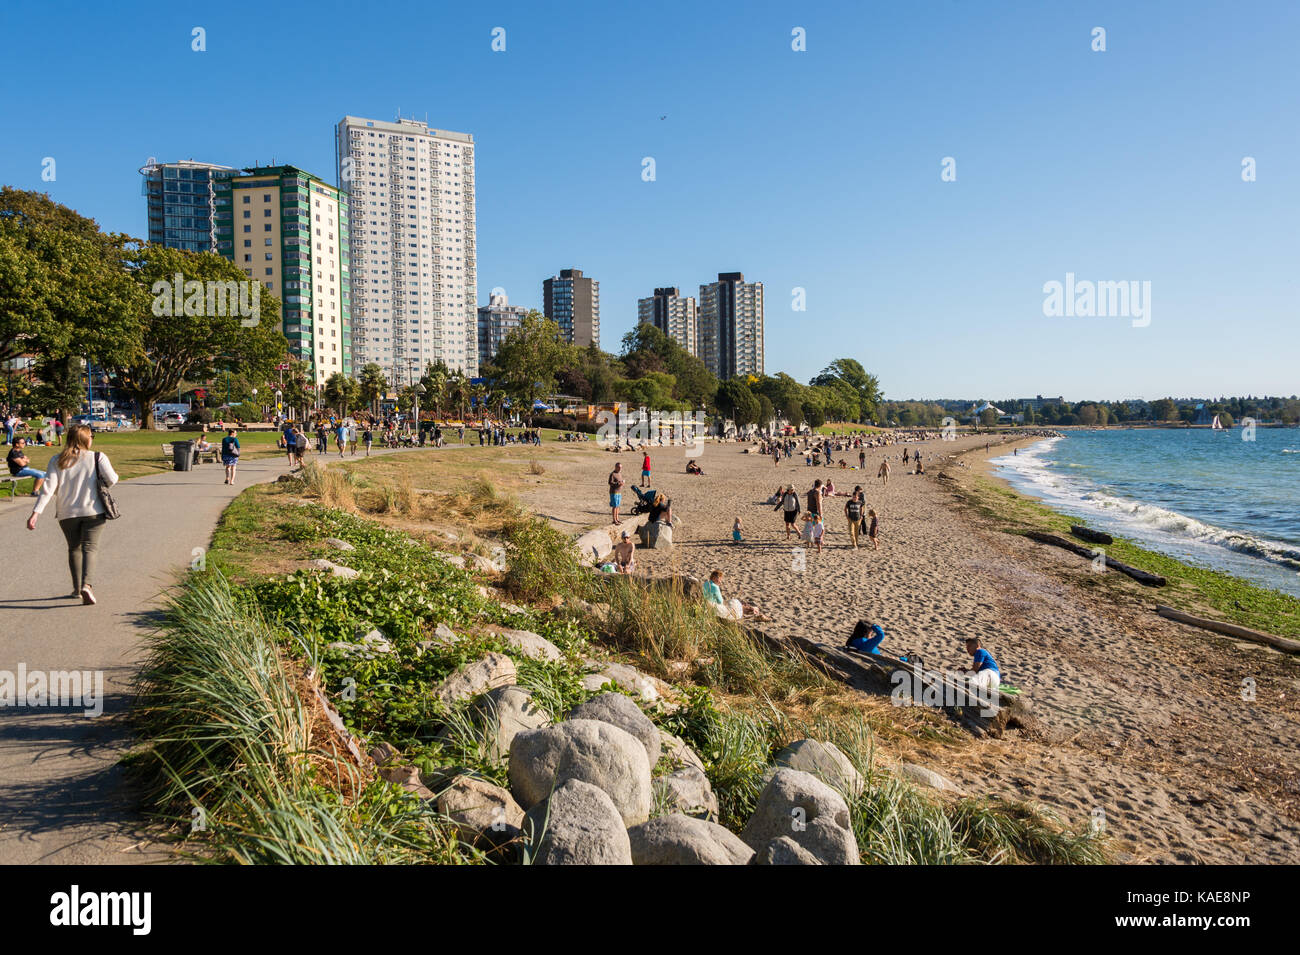 People enjoying a warm and sunny day at Vancouver English Bay beach in summer. Vancouver, British Columbia, Canada - 14 September 2017. Stock Photo